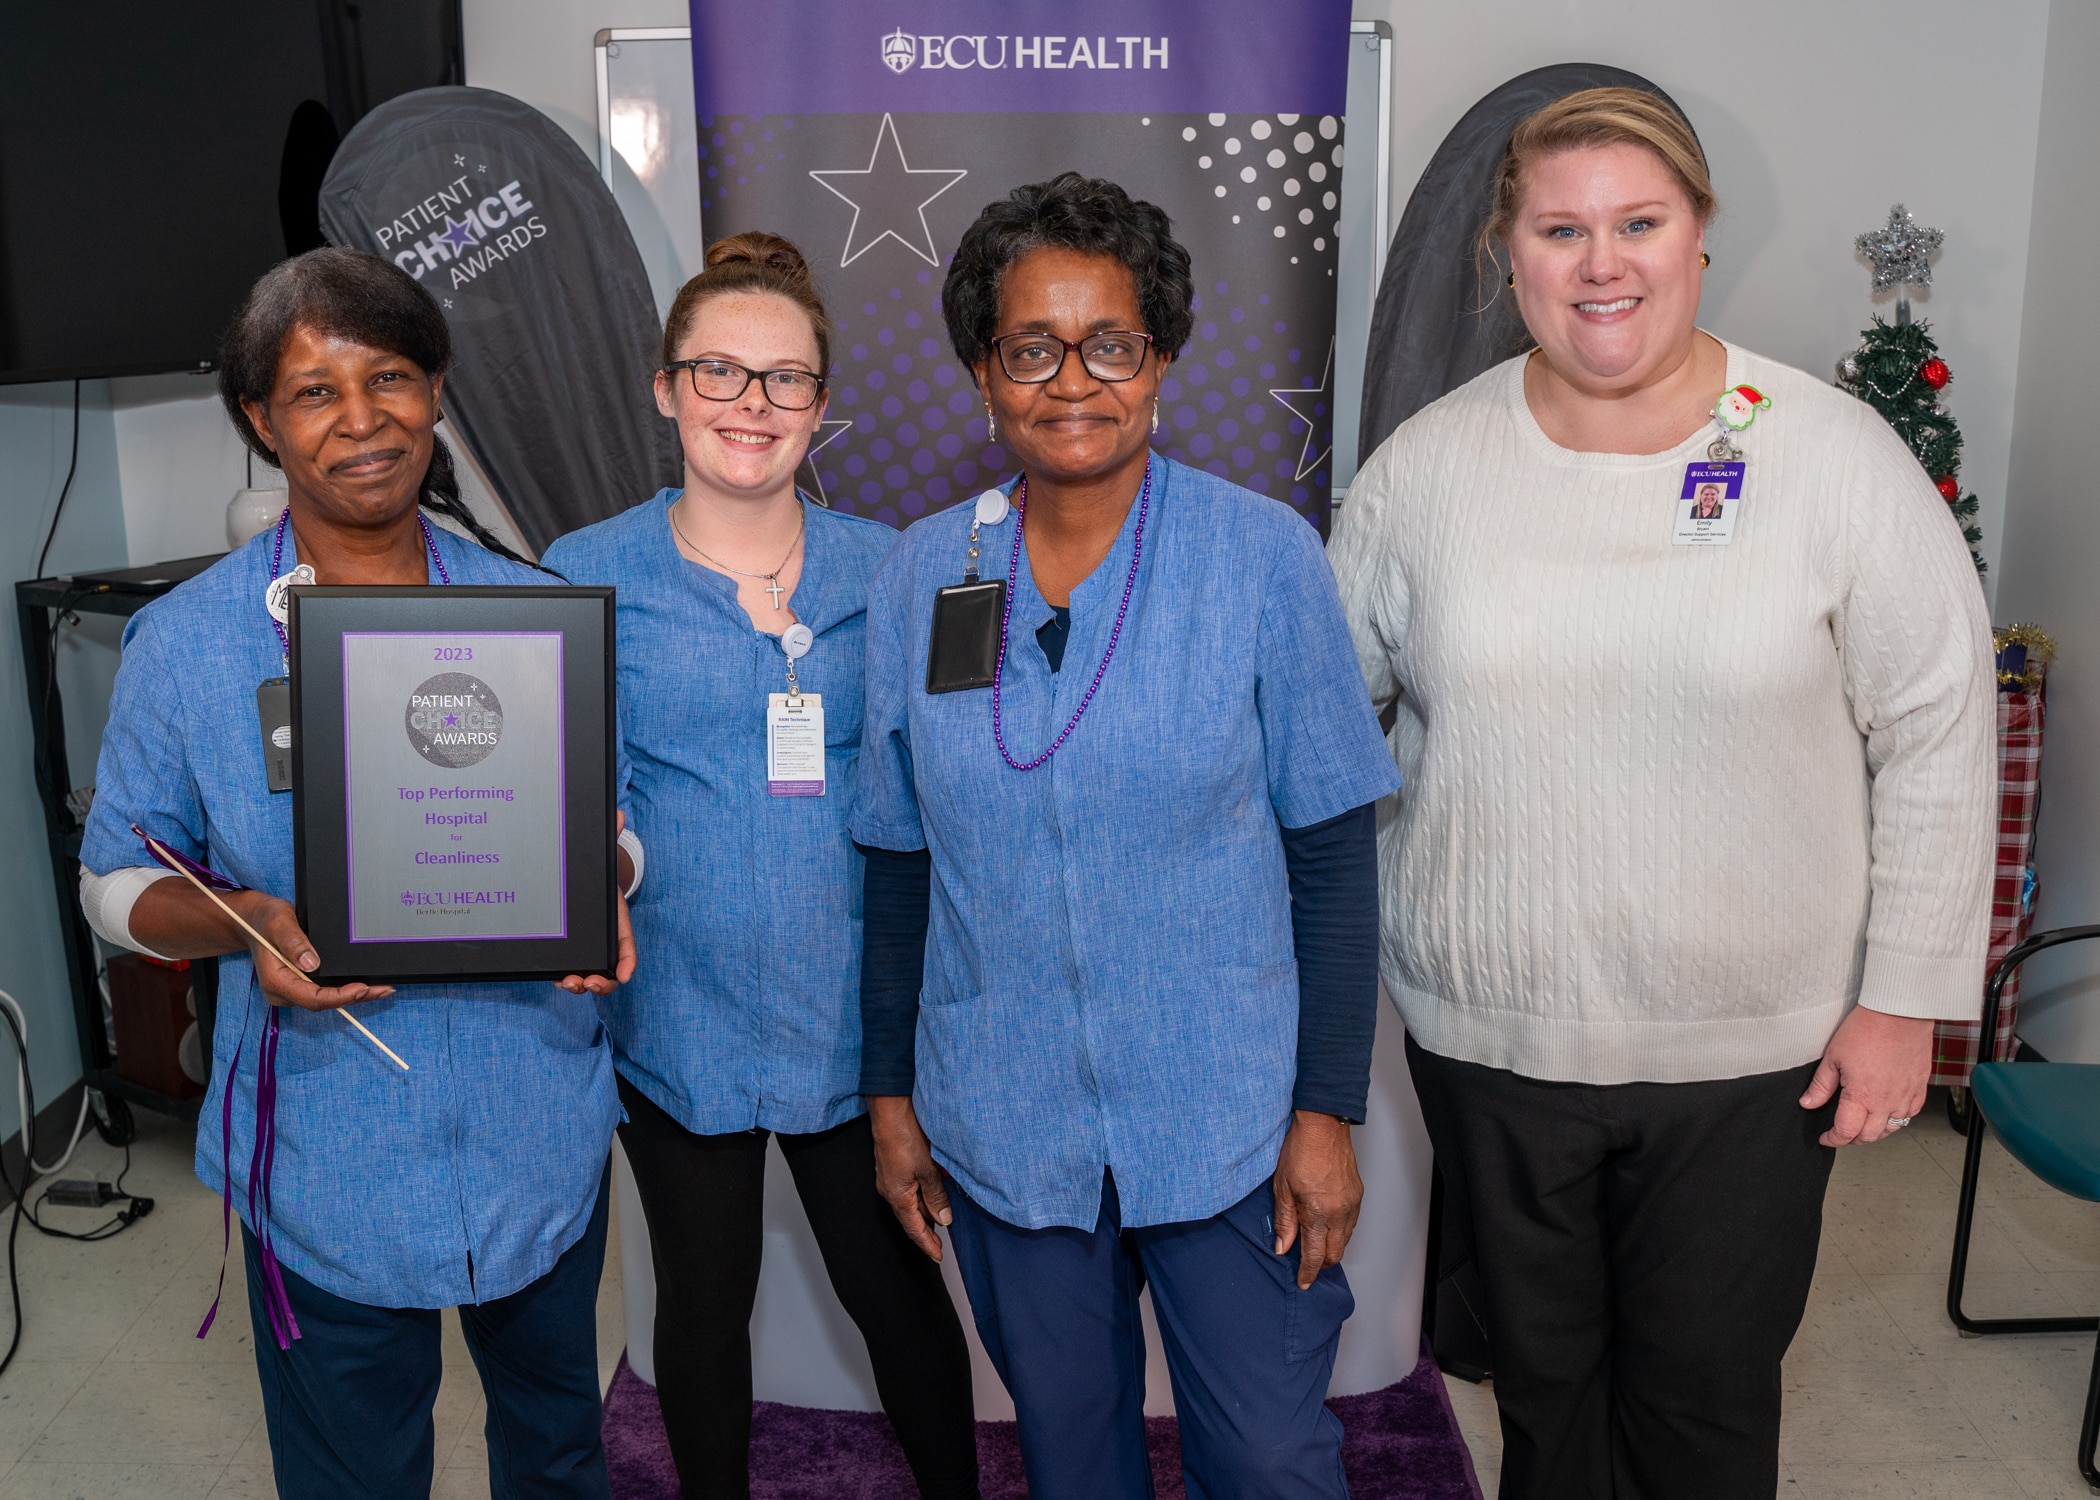 The ECU Health Bertie Hospital team gathers to celebrate their Patient Choice Award for Top Performing Hospital for Cleanliness.